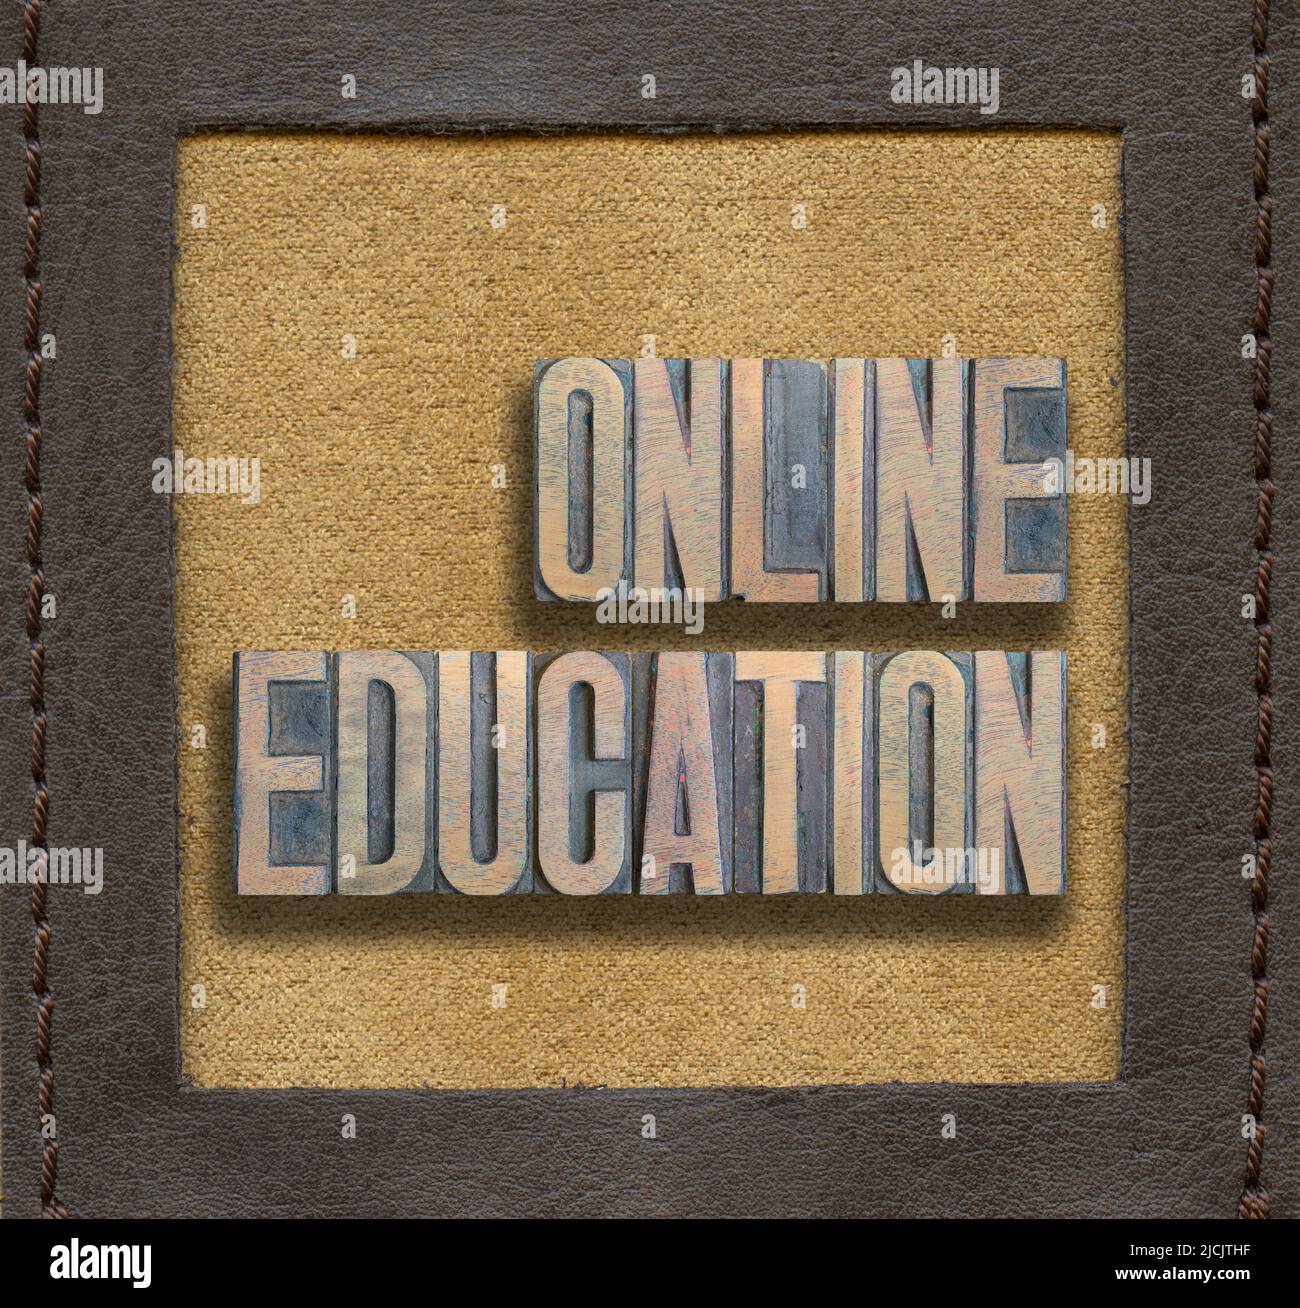 online education made from vintage wooden letterpress inside stitched leather frame Stock Photo